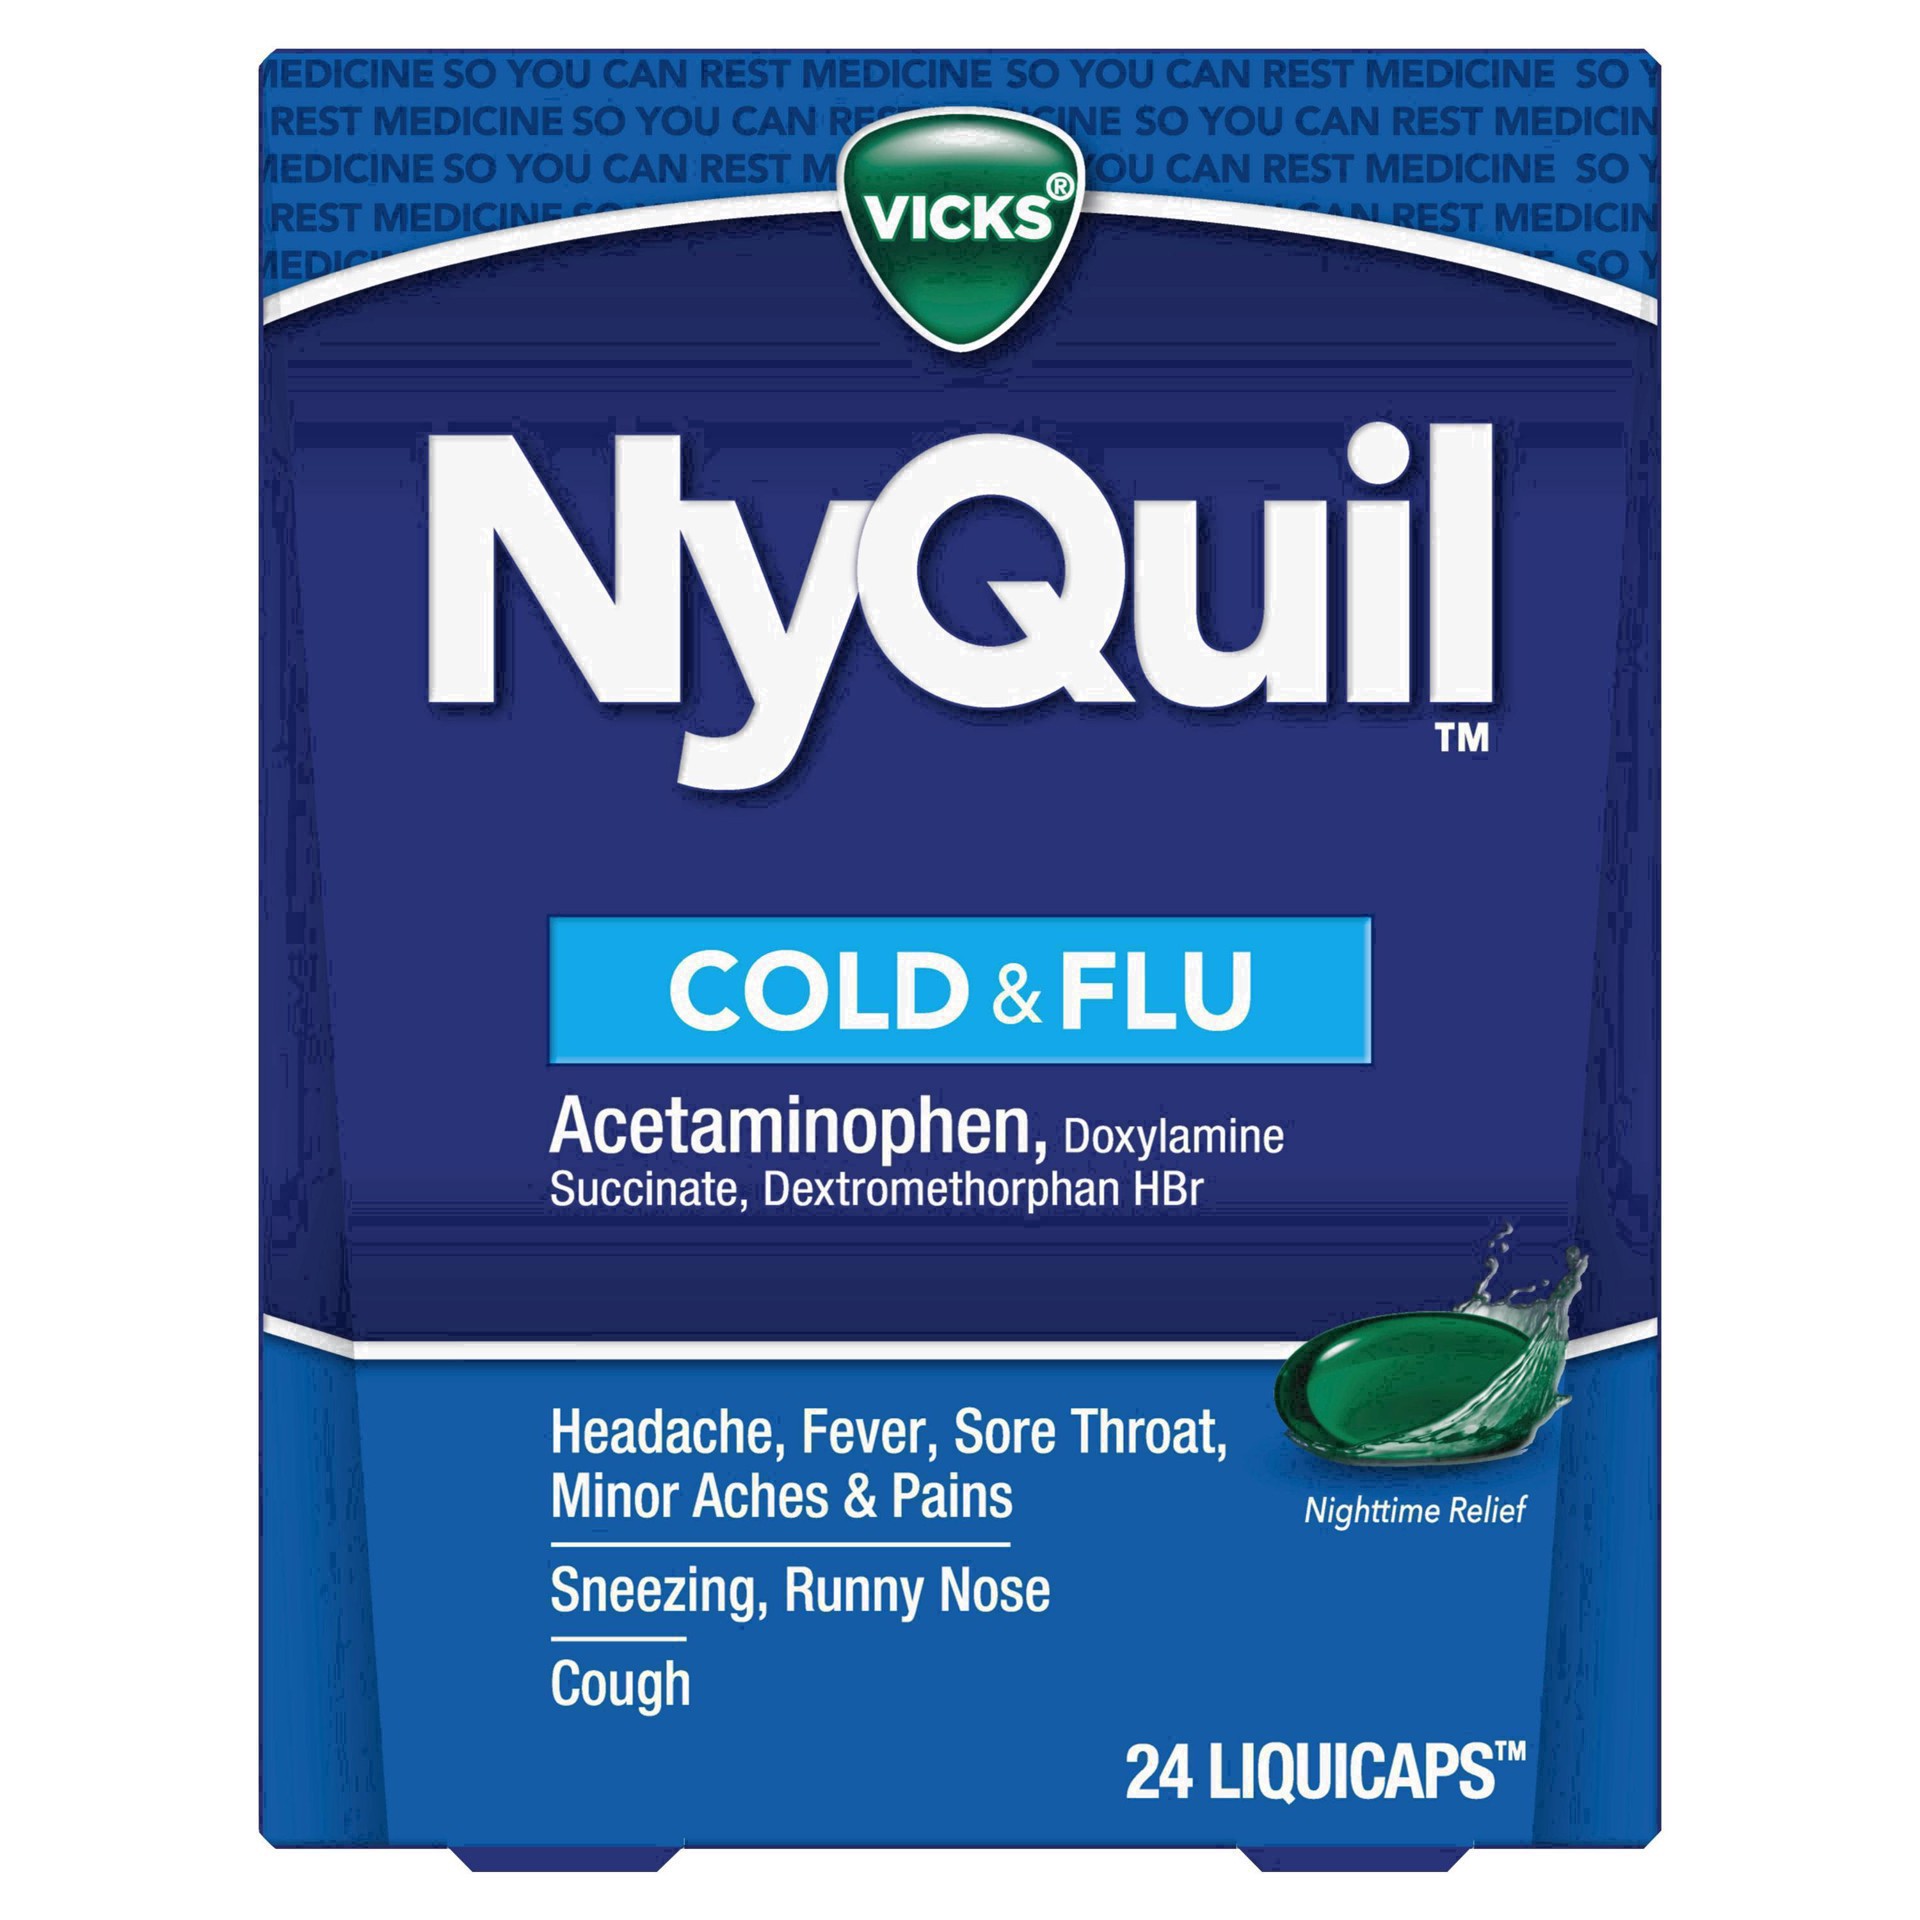 slide 27 of 68, NyQuil Vicks NyQuil Cold & Flu Medicine LiquiCaps - 24ct, 24 ct